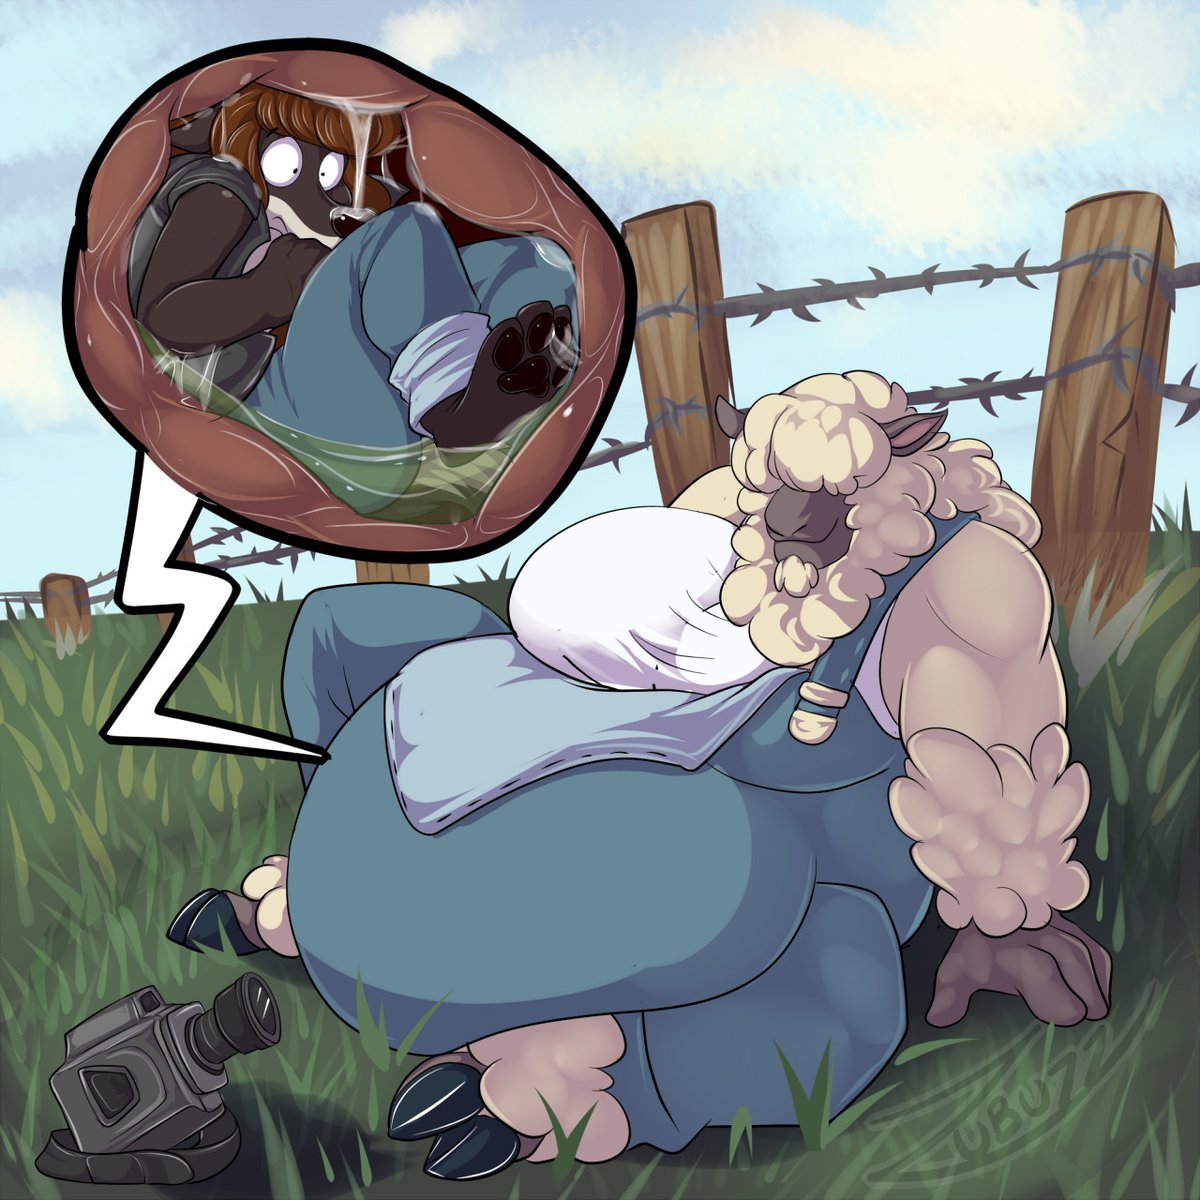 Remember Amira? She was making a helpful documentary about how to eat sheeps good, for science. They don't make sheeps like they used to... ART IS BY THE AMAZING @lectabat YOU SHOULD GO FOLLOW NOW BIG FUCKING SHEEP WITH HAIR IN HER STUPID EYEBALL BELONG TO @DissyOnMain